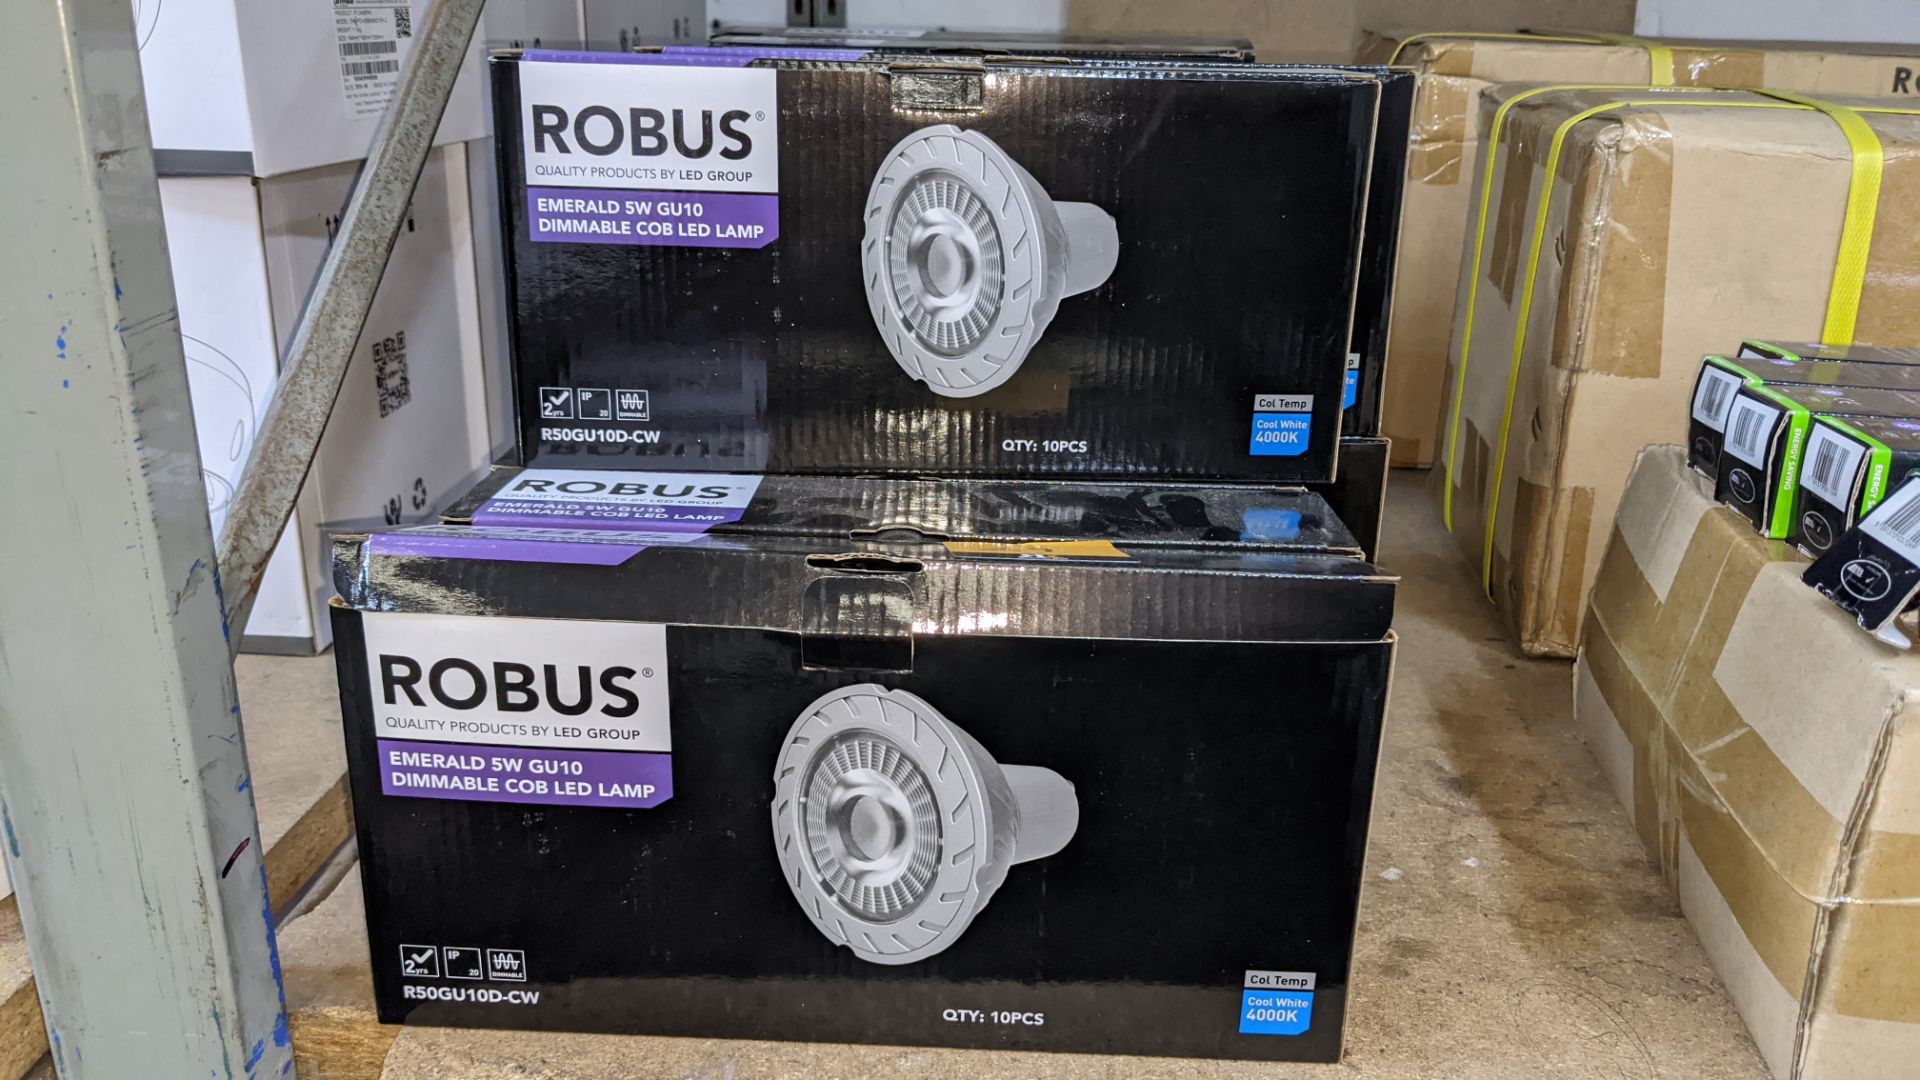 6 boxes each containing 10 off Robus Emerald 5W GU10 dimmable COB LED lamps (cool white 4000K) - Image 3 of 4